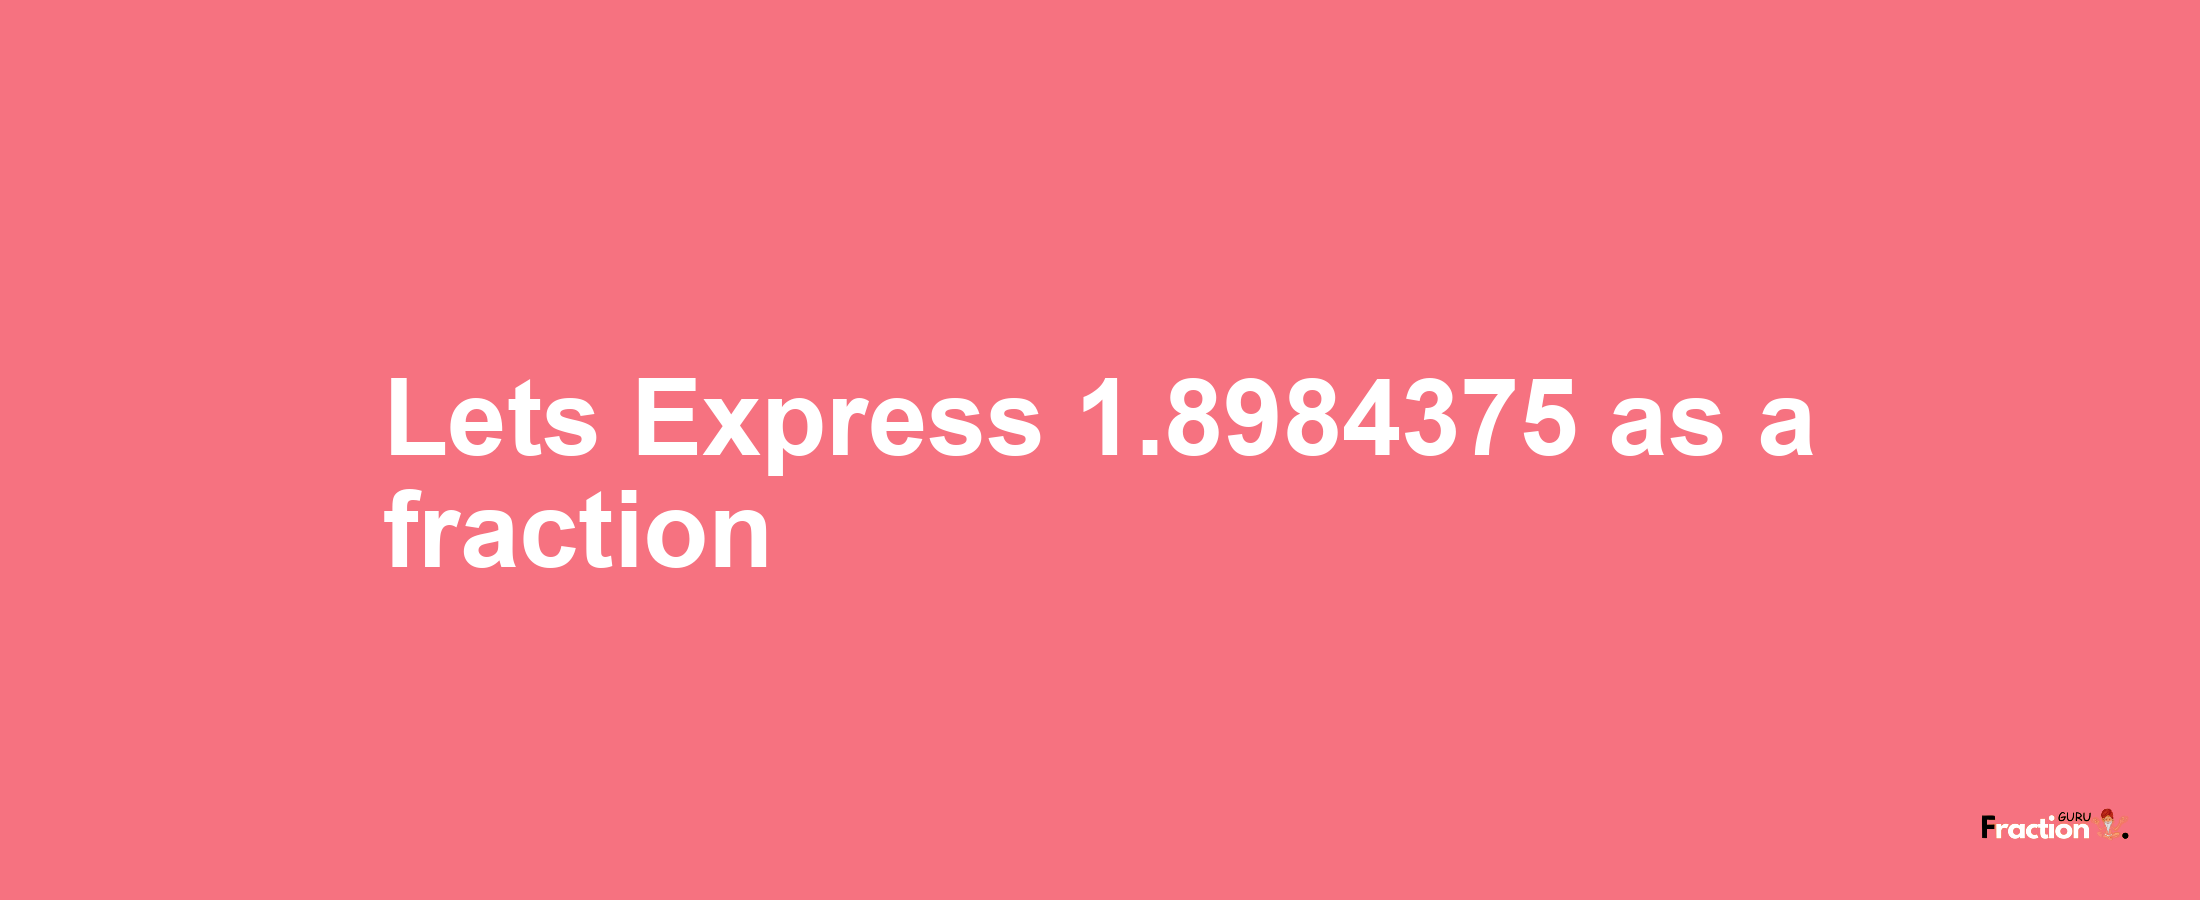 Lets Express 1.8984375 as afraction